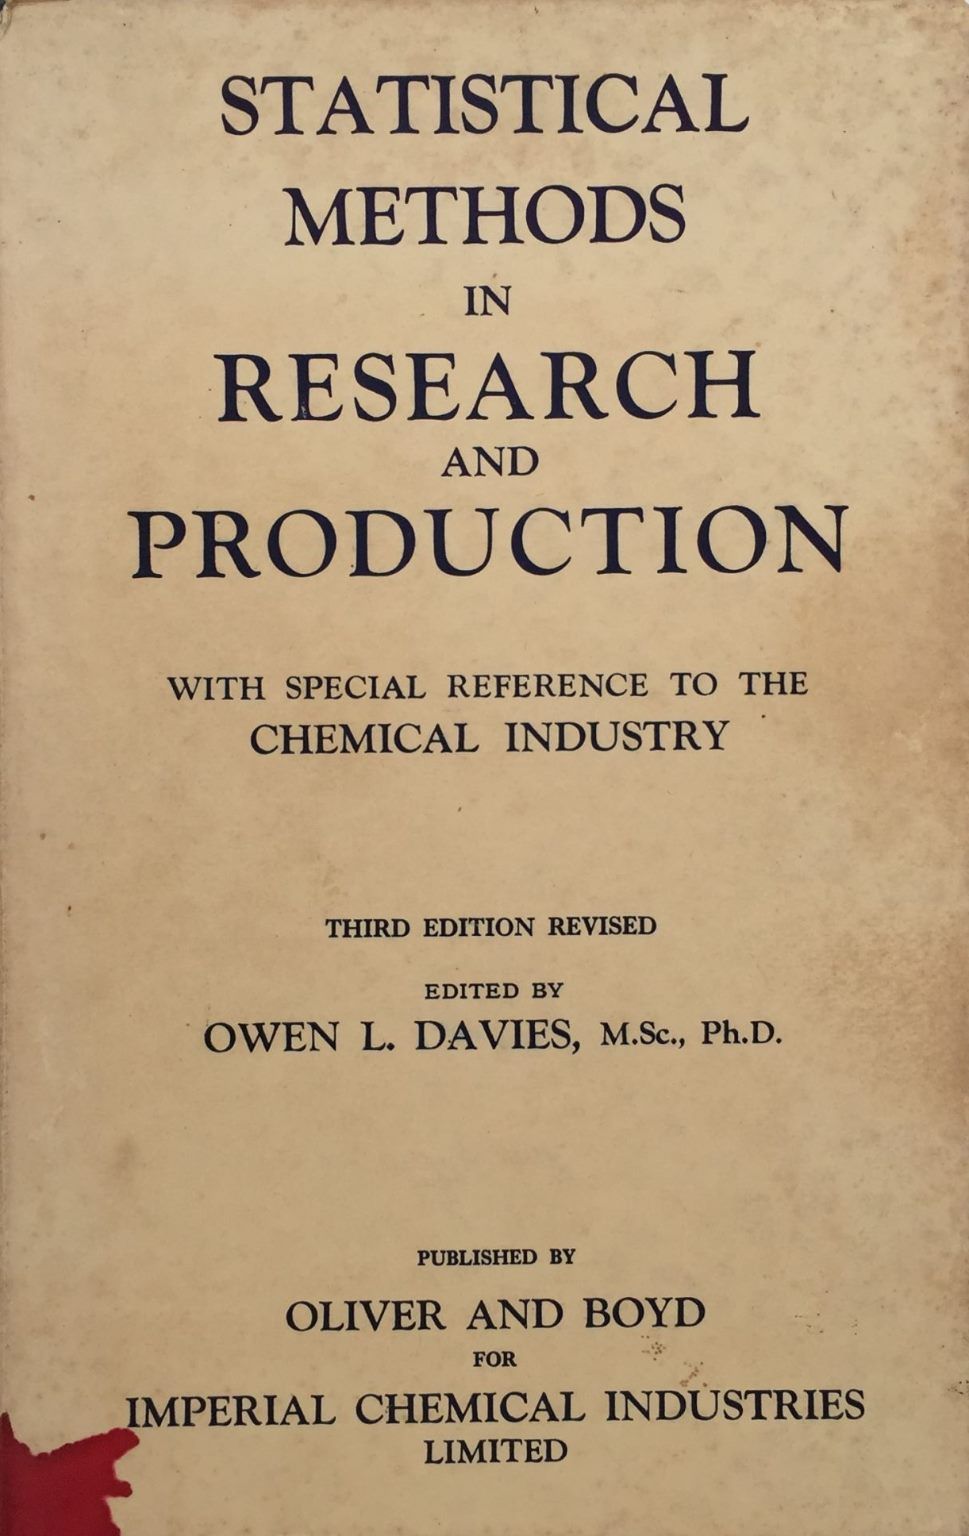 STATISTICAL METHODS IN RESEARCH AND PRODUCTION: To The Chemical Industry